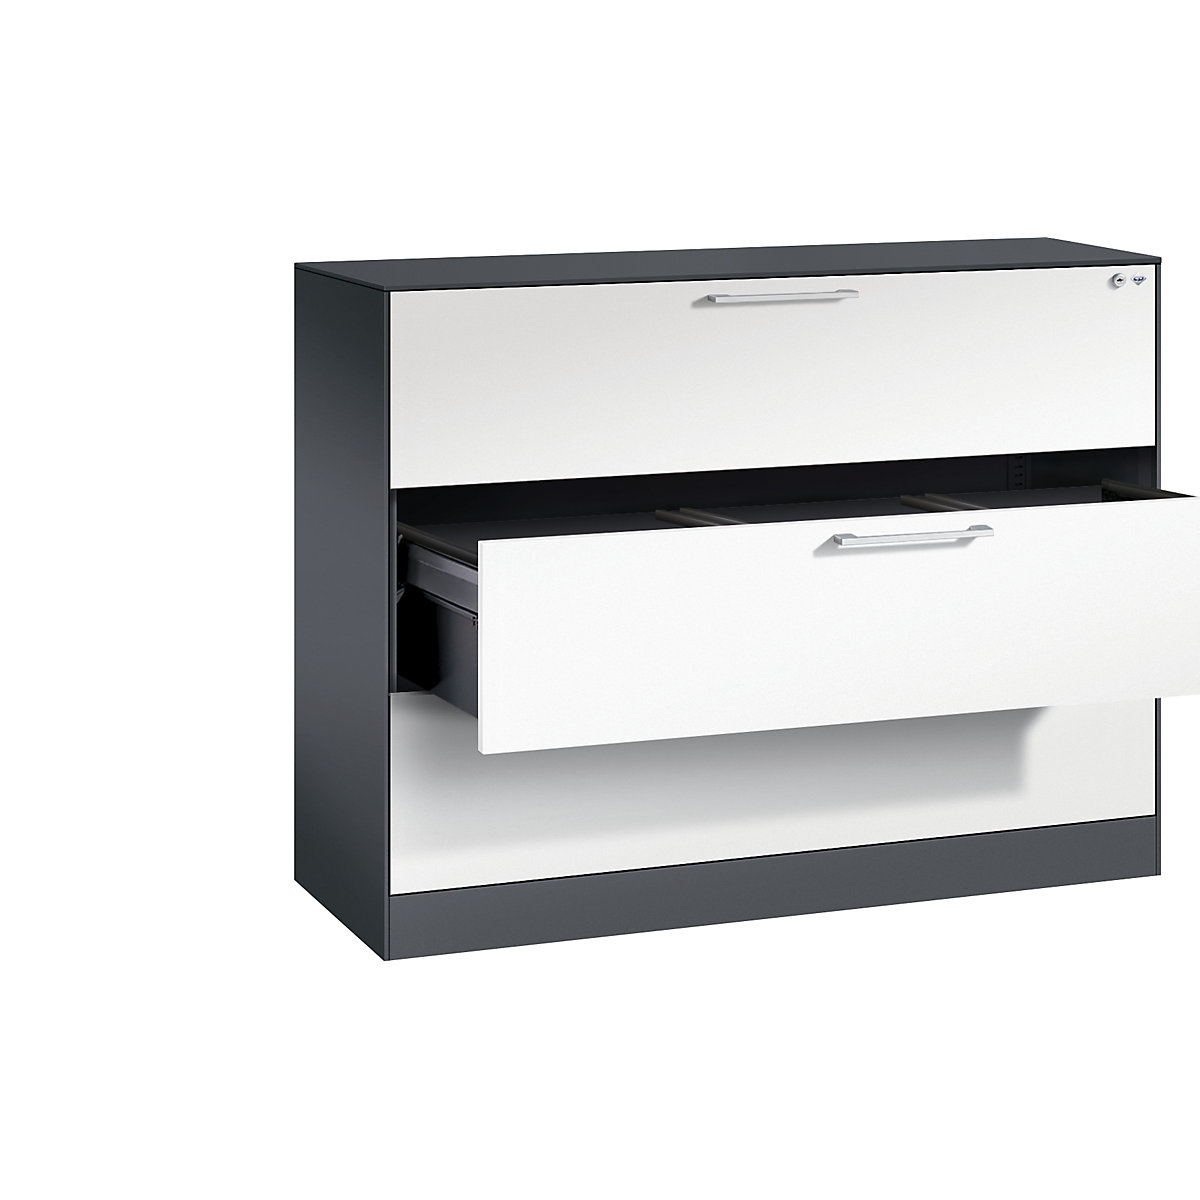 ASISTO suspension filing cabinet – C+P, width 1200 mm, with 3 drawers, black grey/traffic white-19